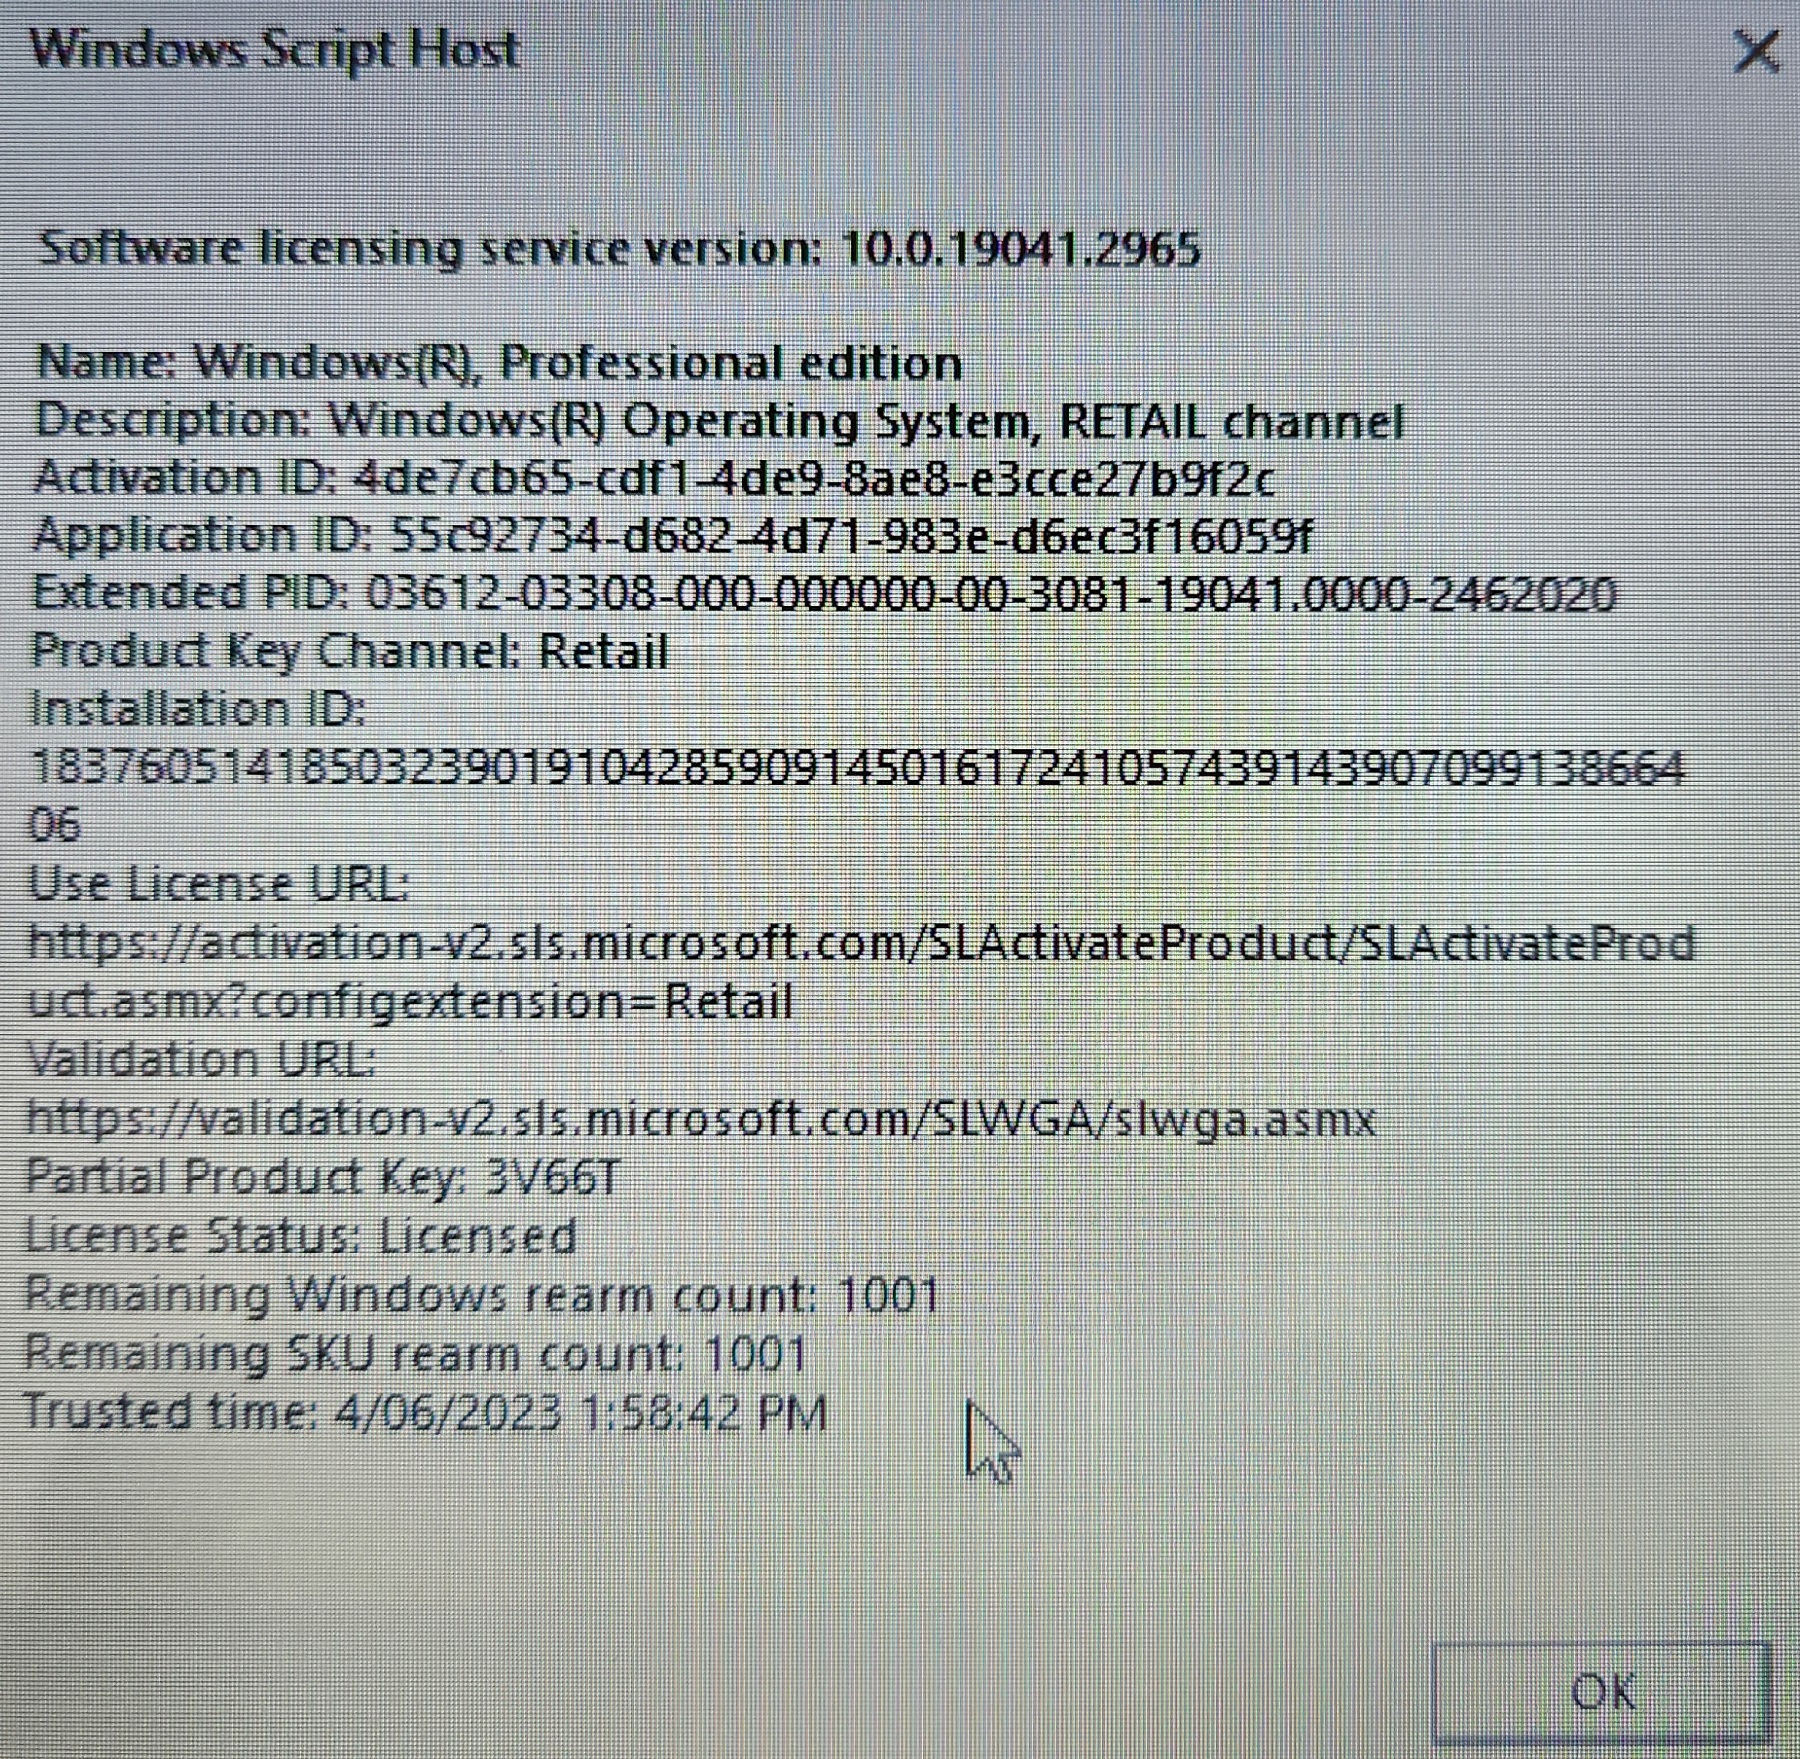 Why this windows activation key labeled with OEM but a MAK key? - Microsoft  Q&A